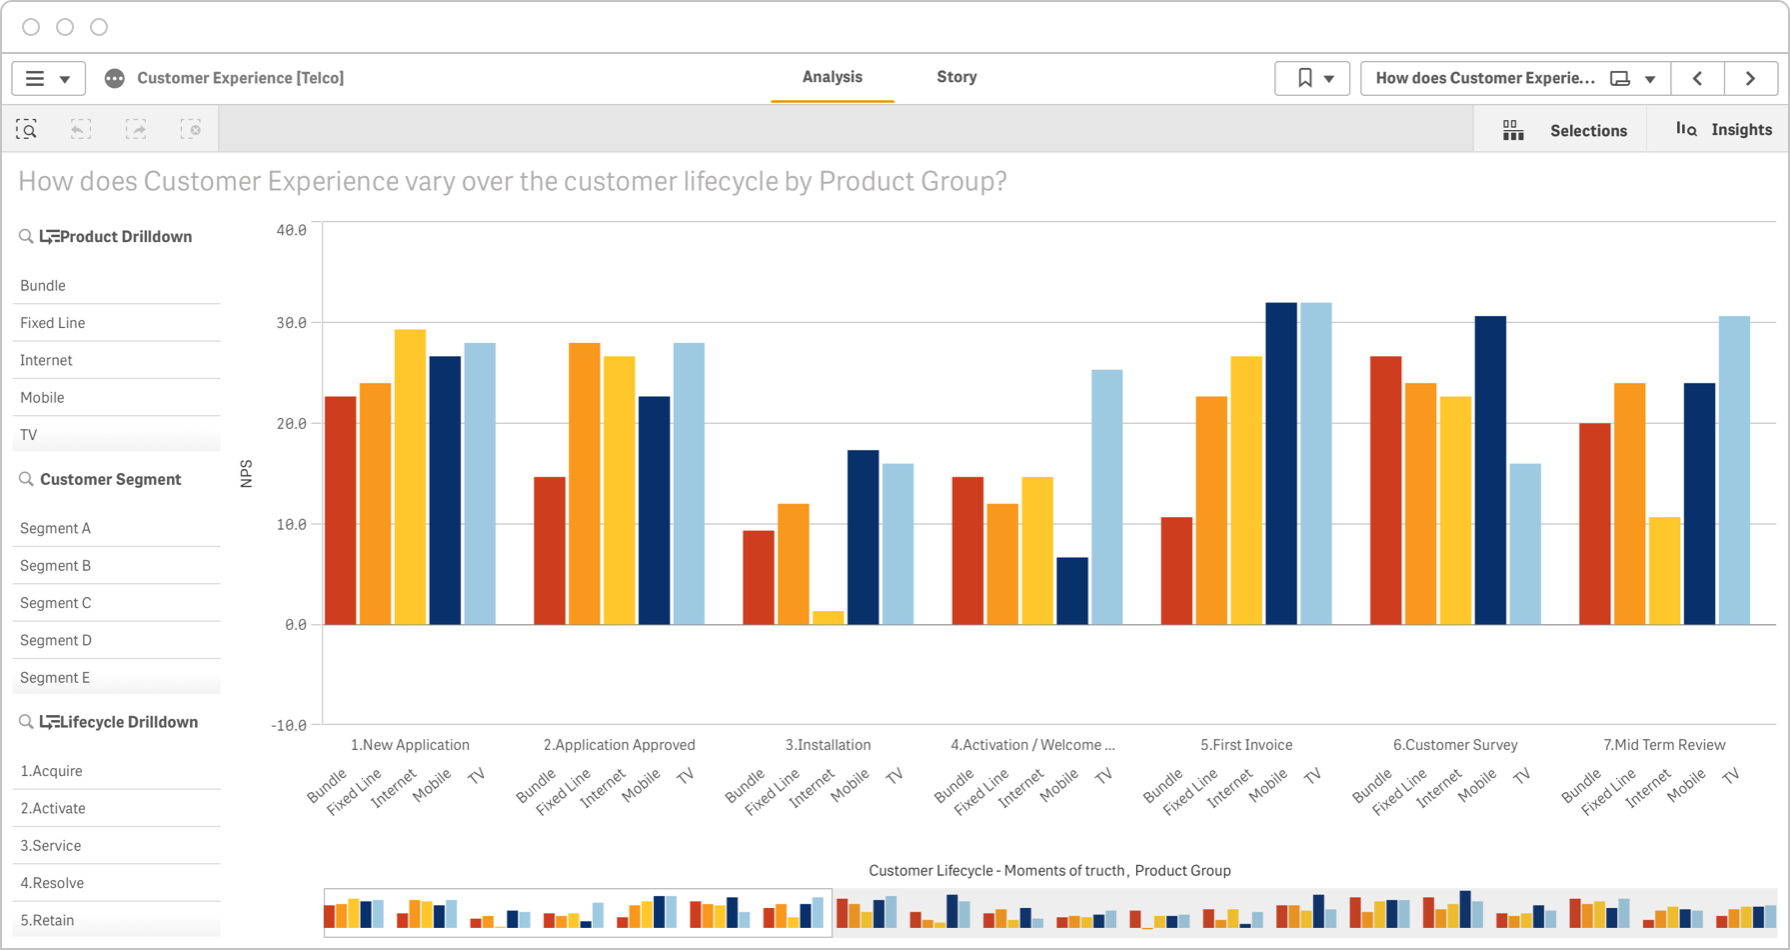 The customer lifecycle dashboard provides a complete picture of the customer experience across phases.